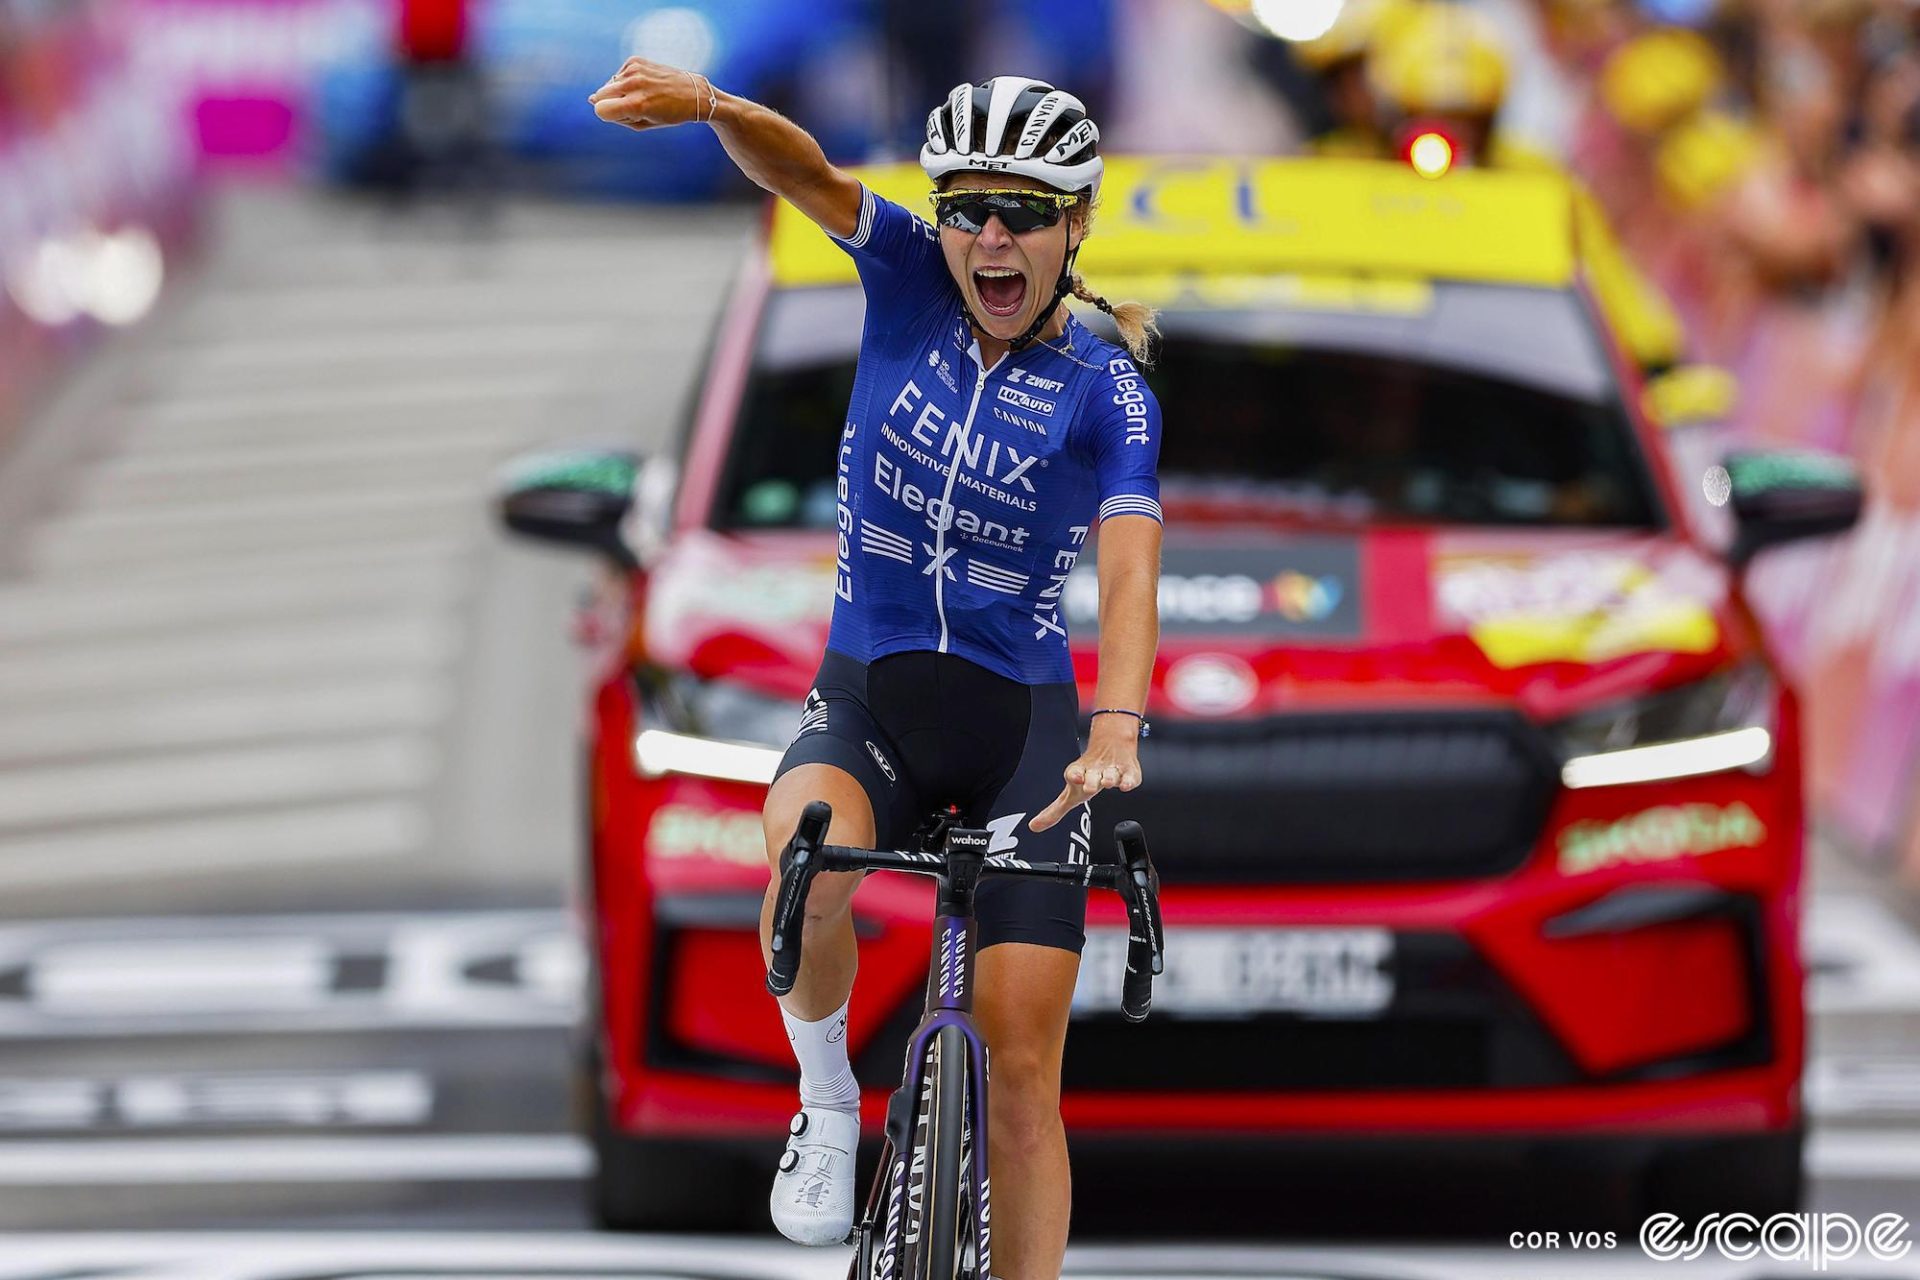 Yara Kastelijn celebrates as she crosses the line solo to win stage 4 of the 2023 Tour de France Femmes.